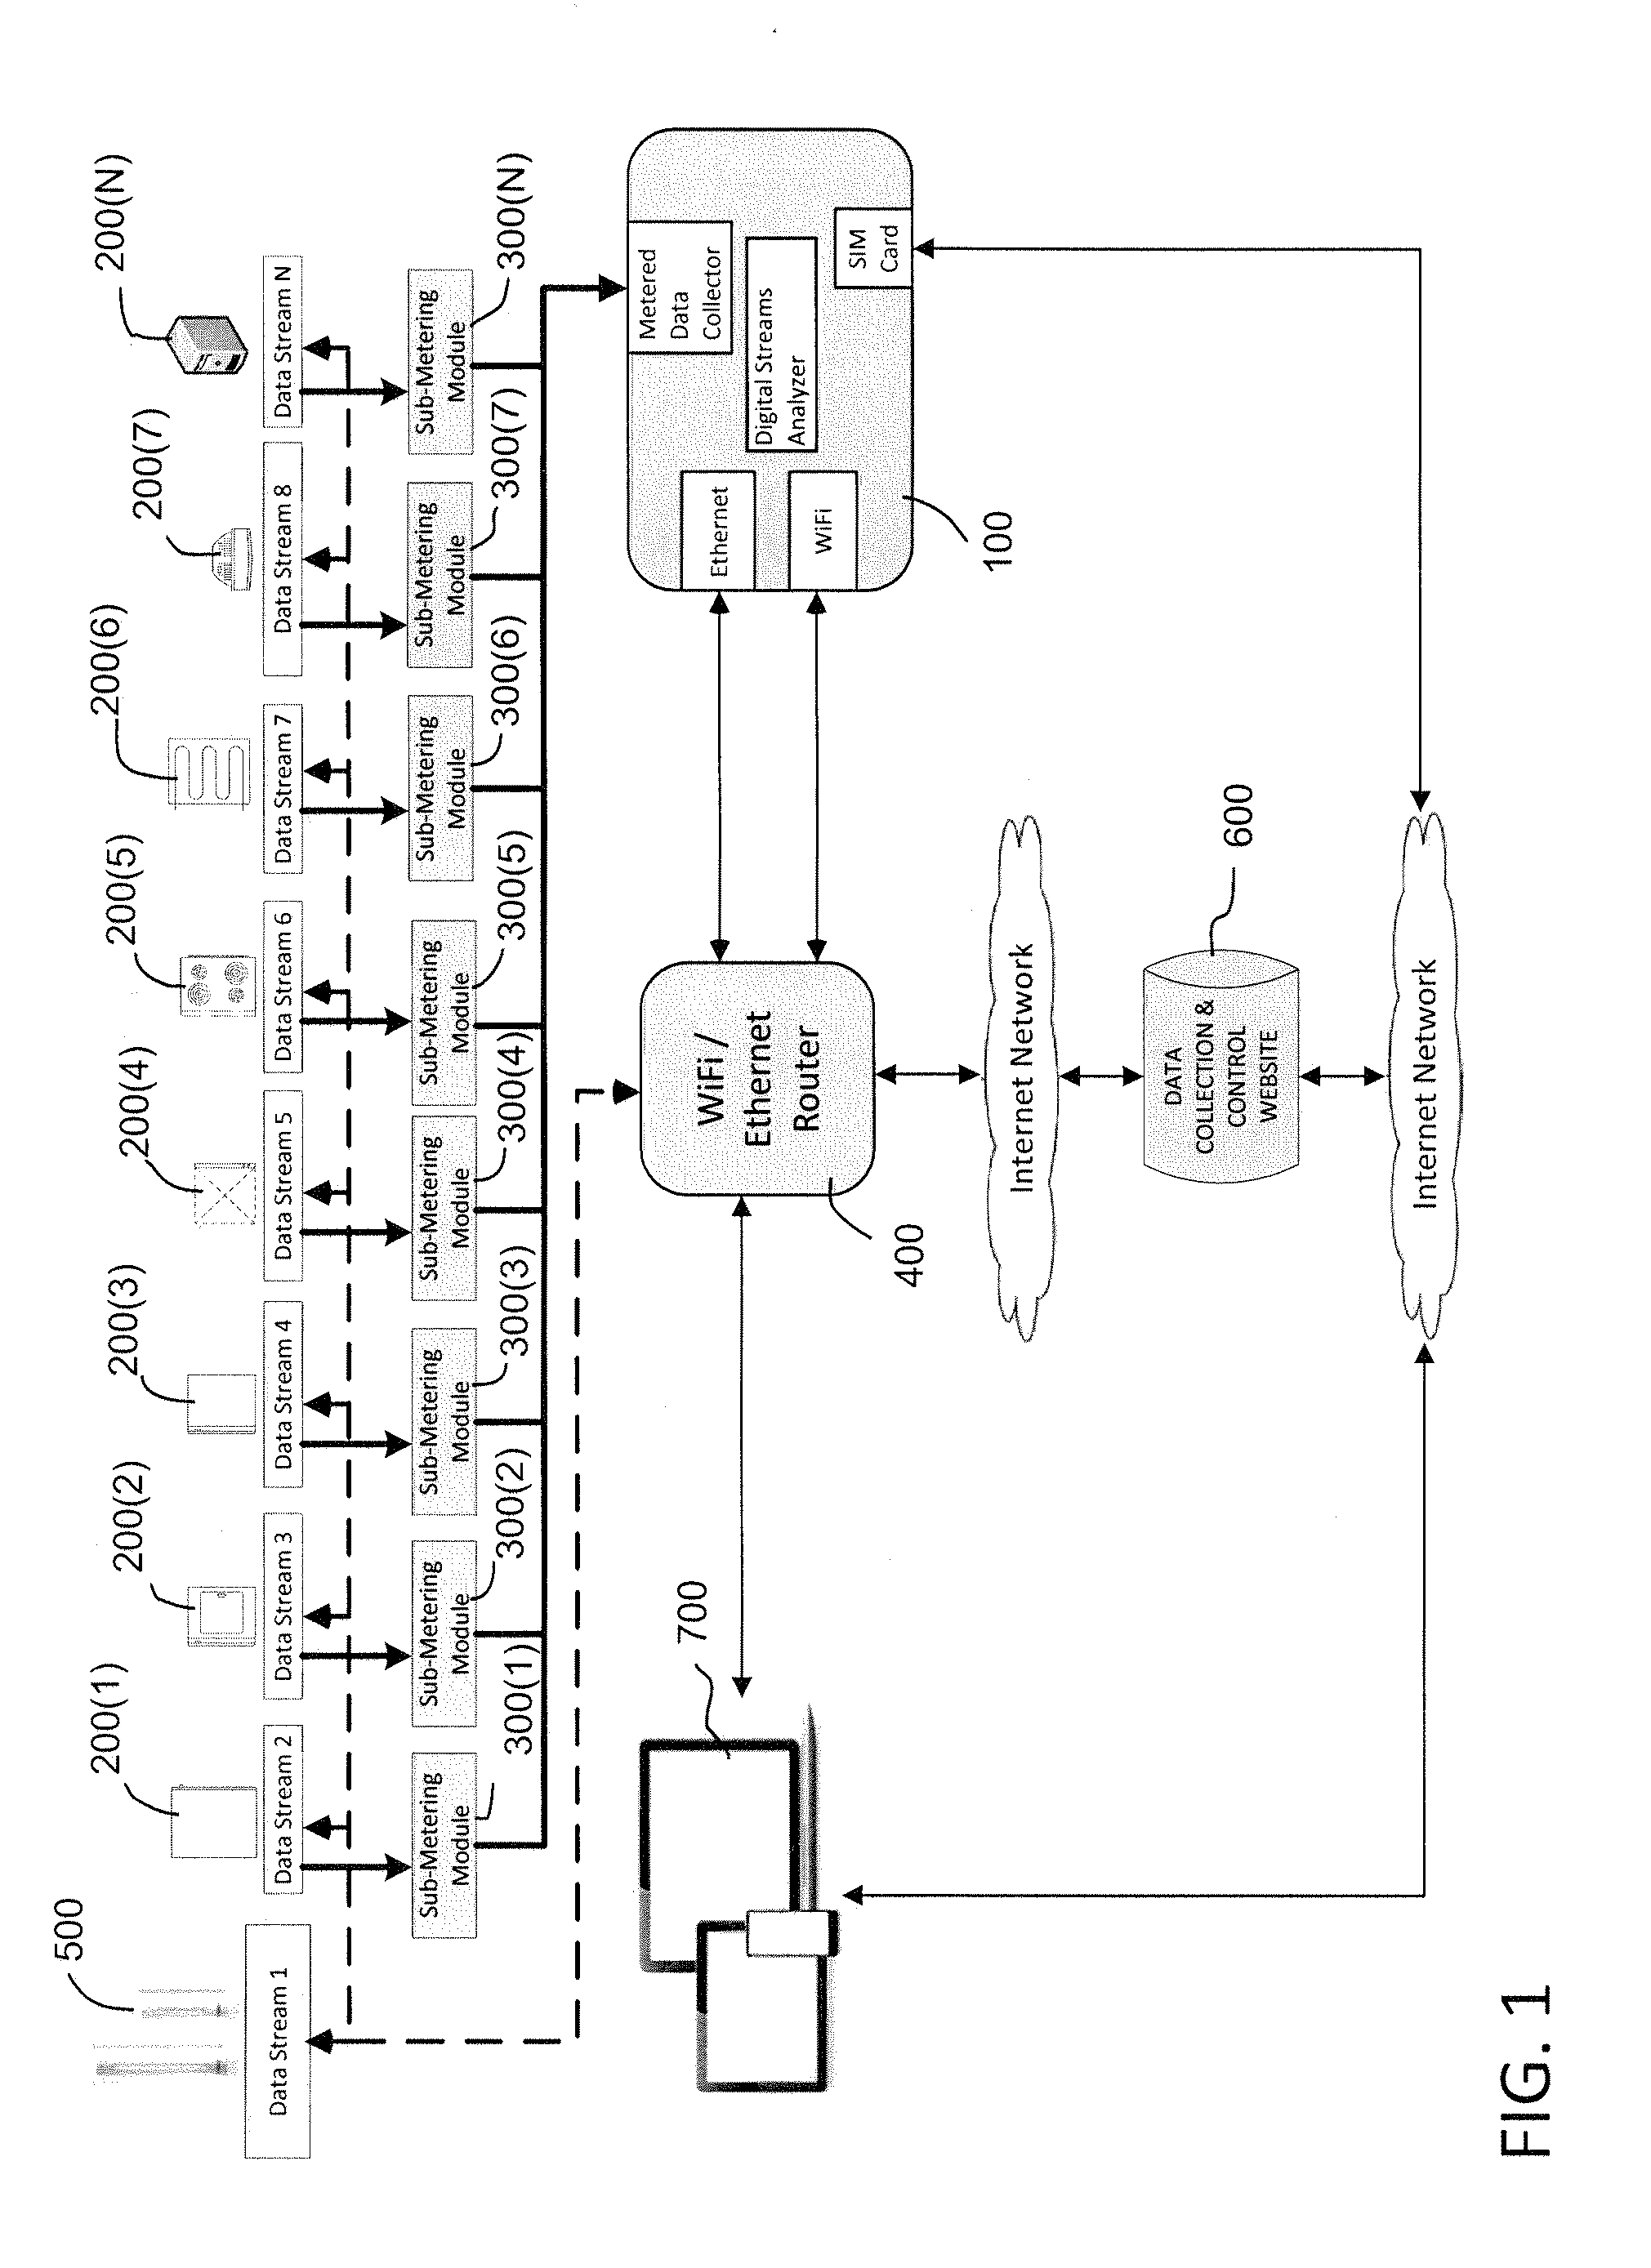 Electronic hub appliances used for collecting, storing, and processing potentially massive periodic data streams indicative of real-time or other measuring parameters